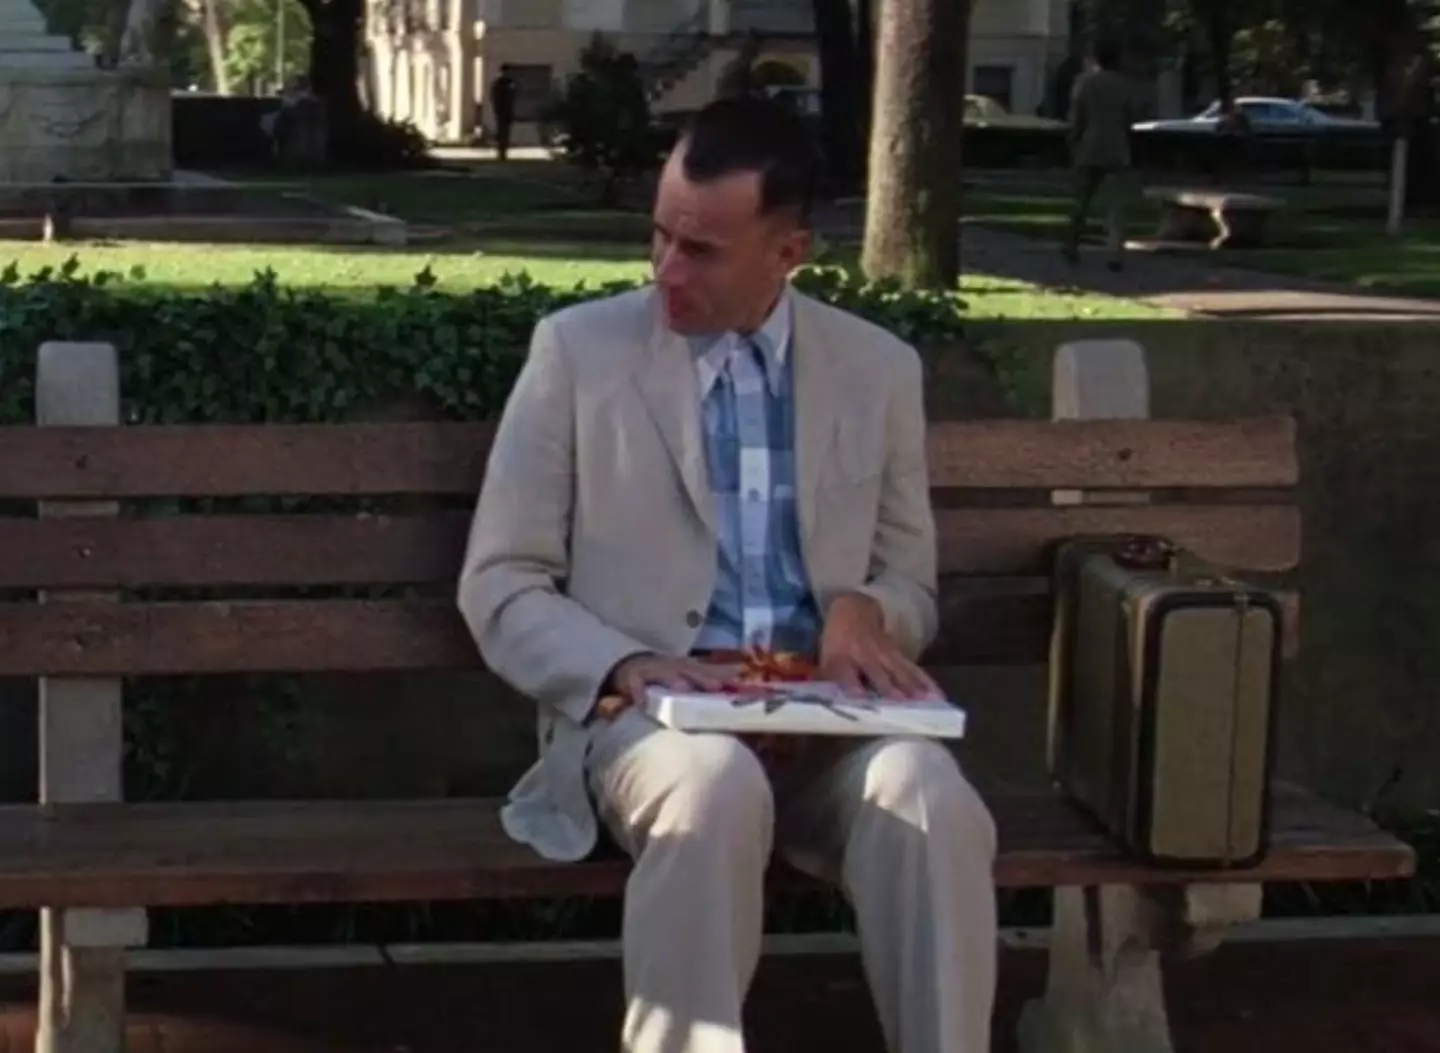 Forrest Gump's bench was one of the giveaways for Hugo.